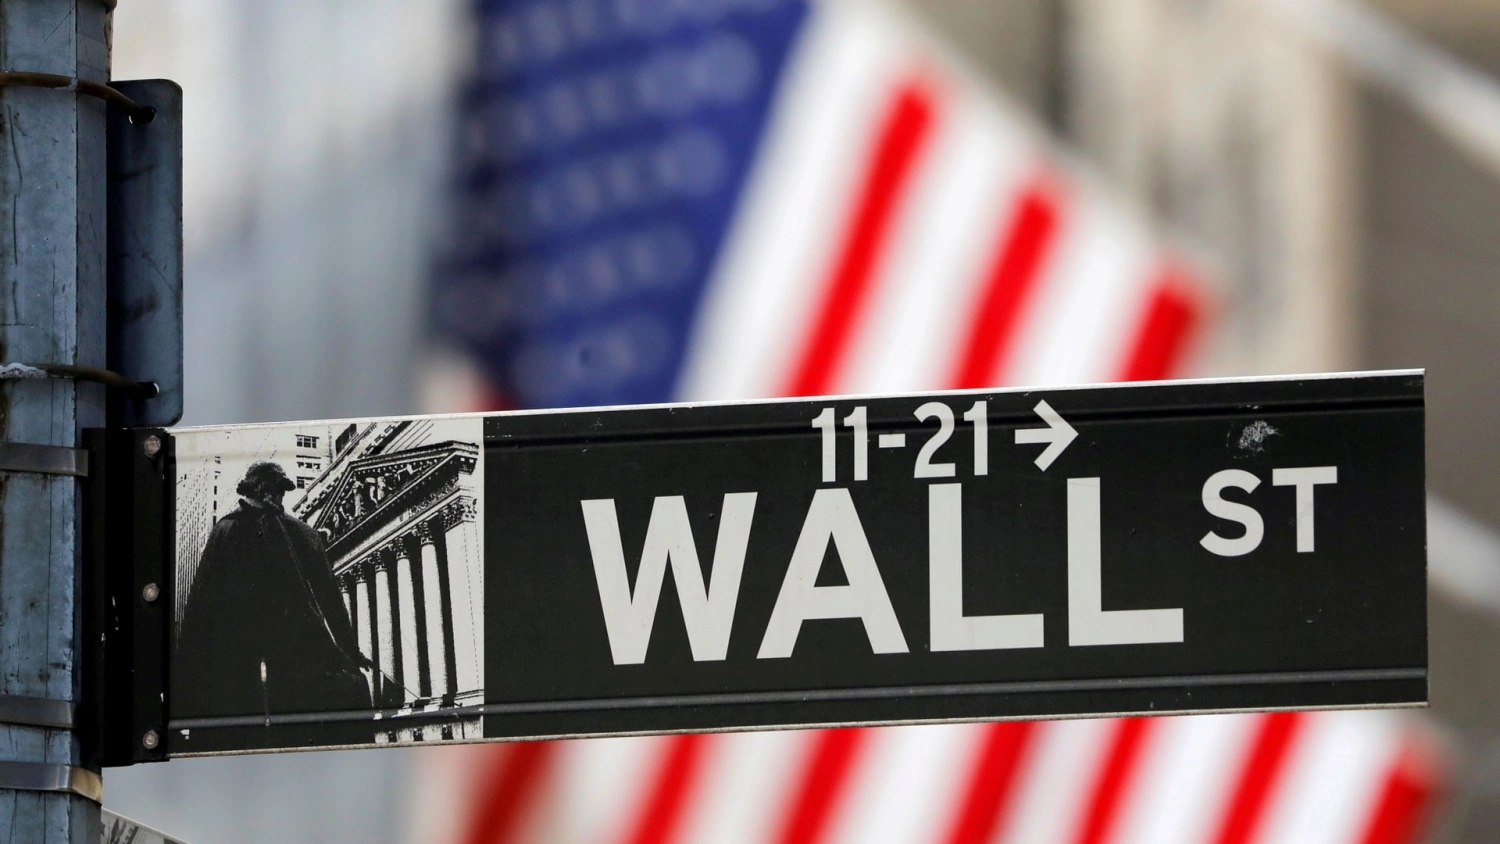 Wall Street showed a clear recovery on Wednesday